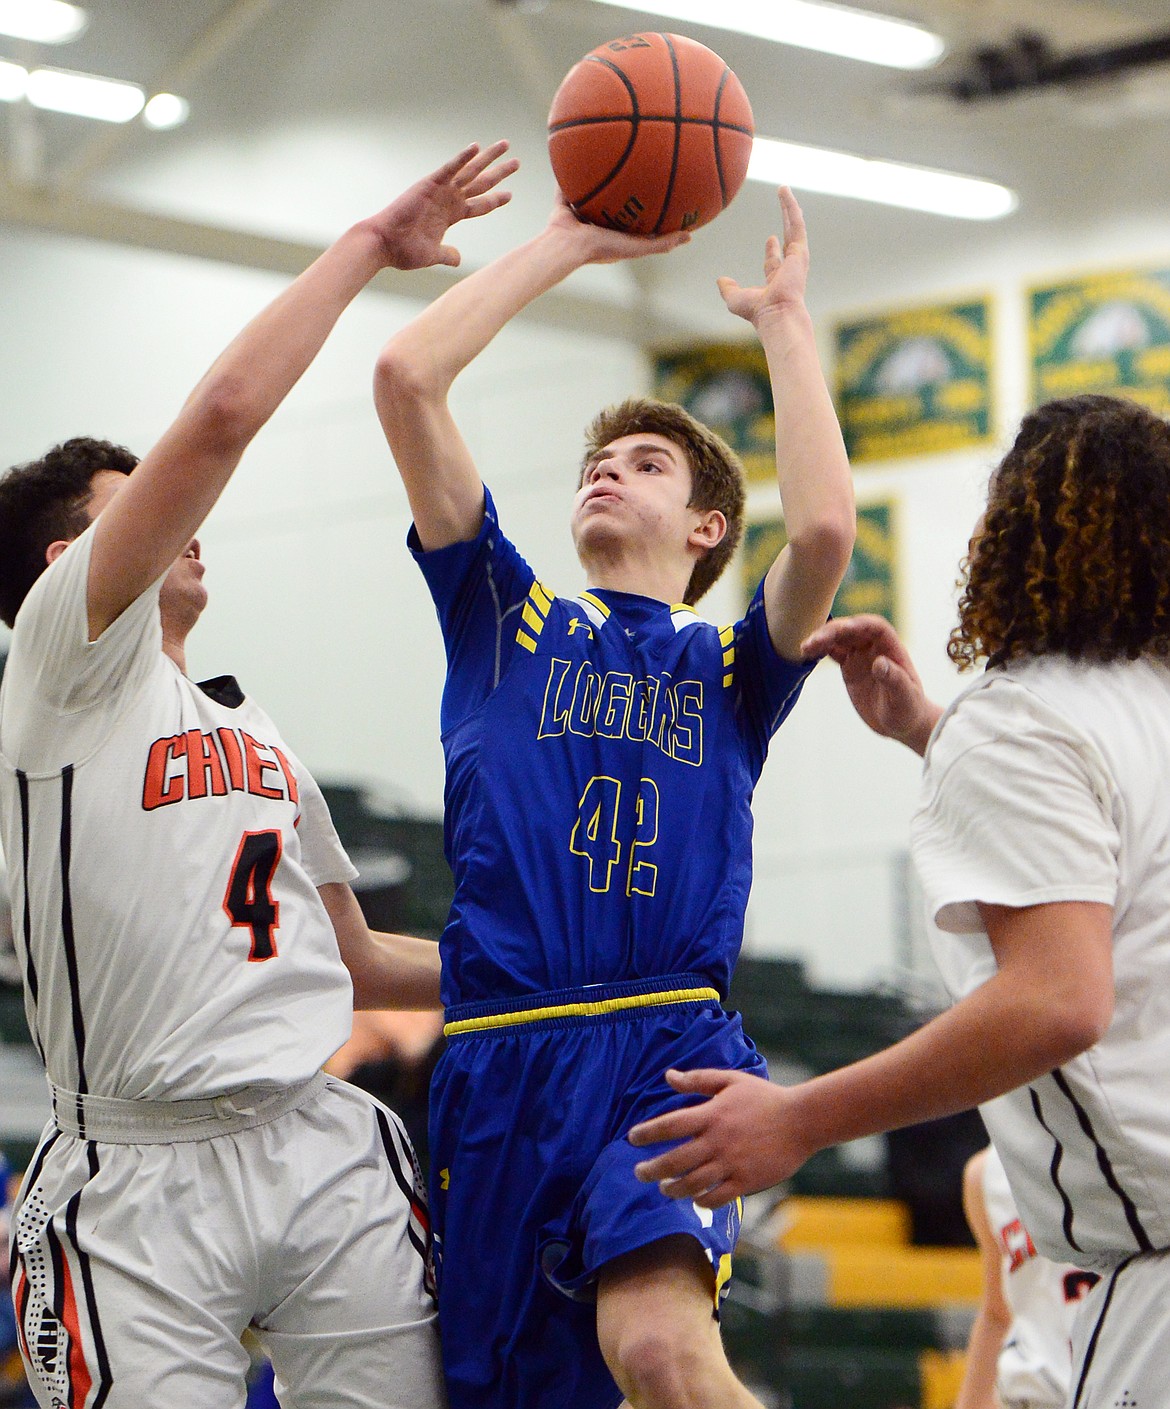 Libby's Keith Johnson (42) drives to the basket between Ronan's Dallas Durheim (4) and Anthony Camel (50) at Whitefish High School on Thursday. (Casey Kreider/Daily Inter Lake)